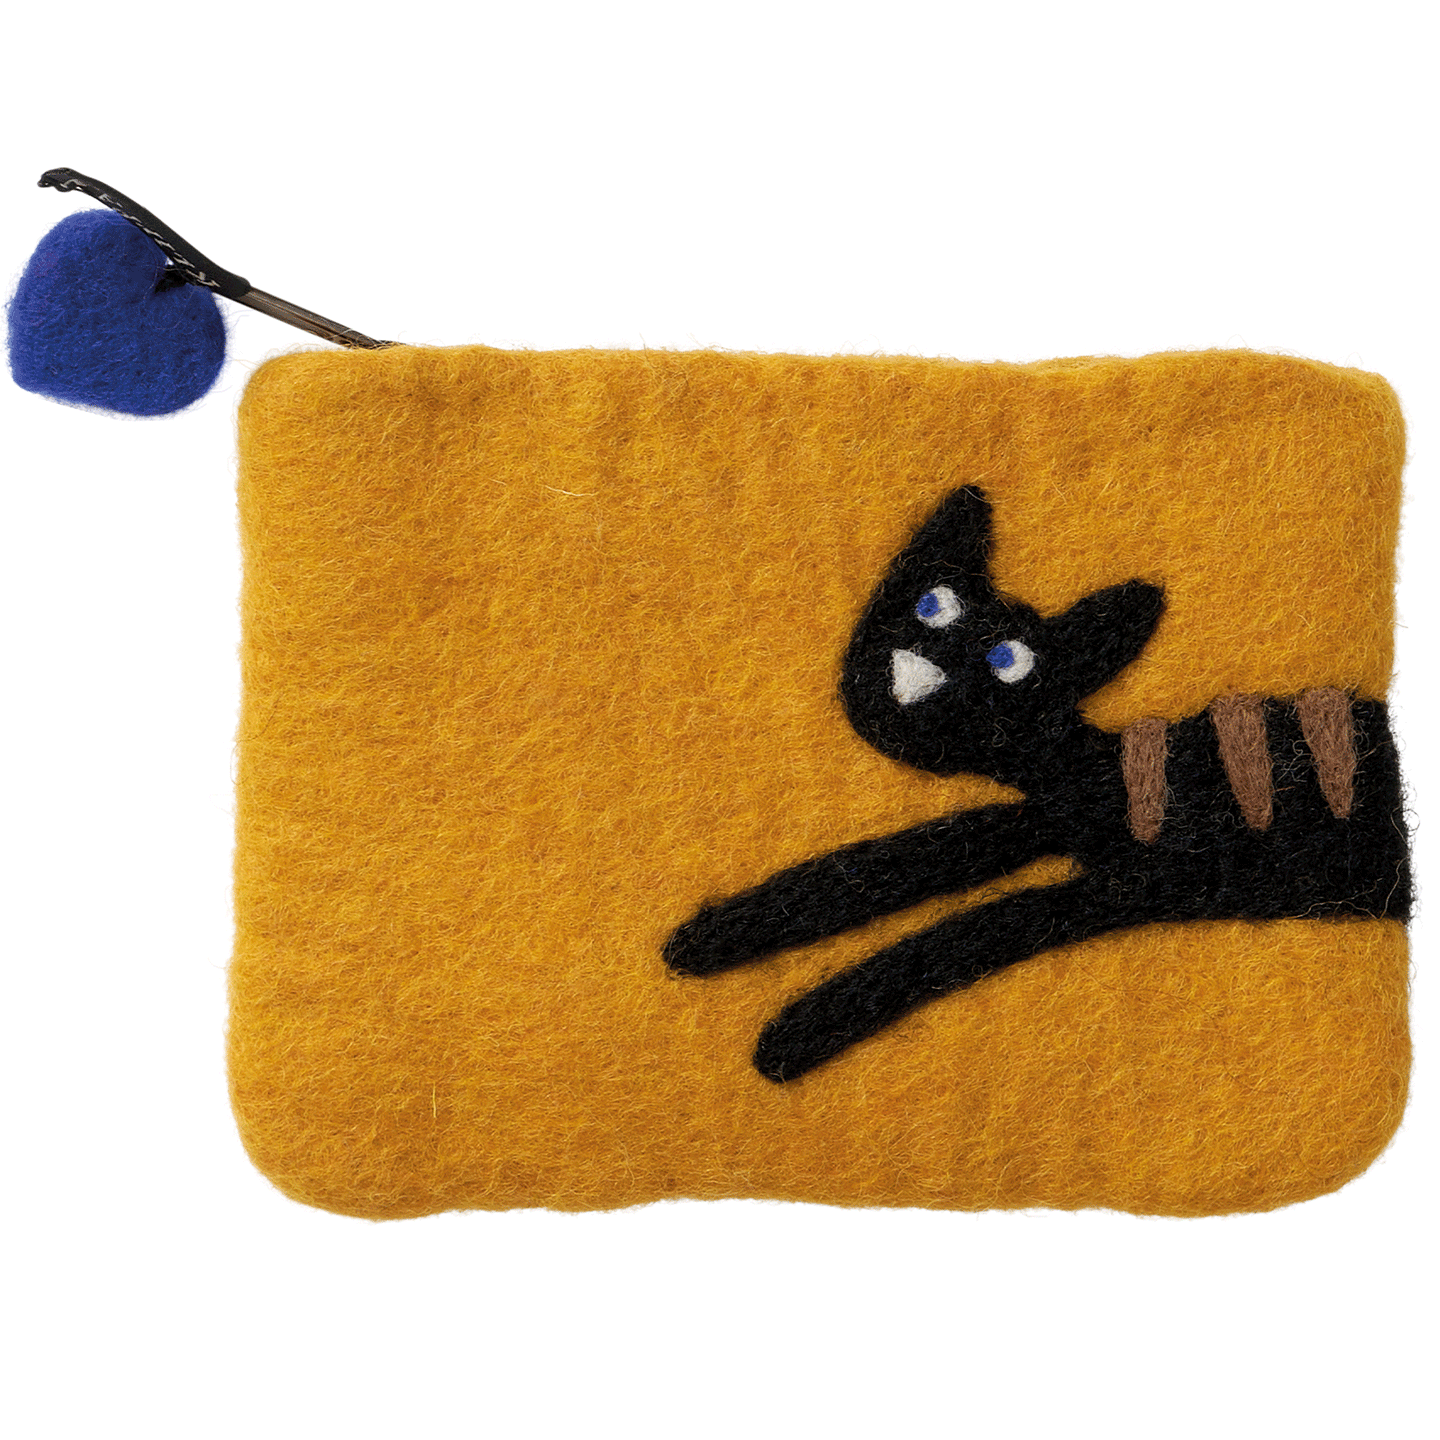 Jumping Cat Felted Wool Purse 14x10cm